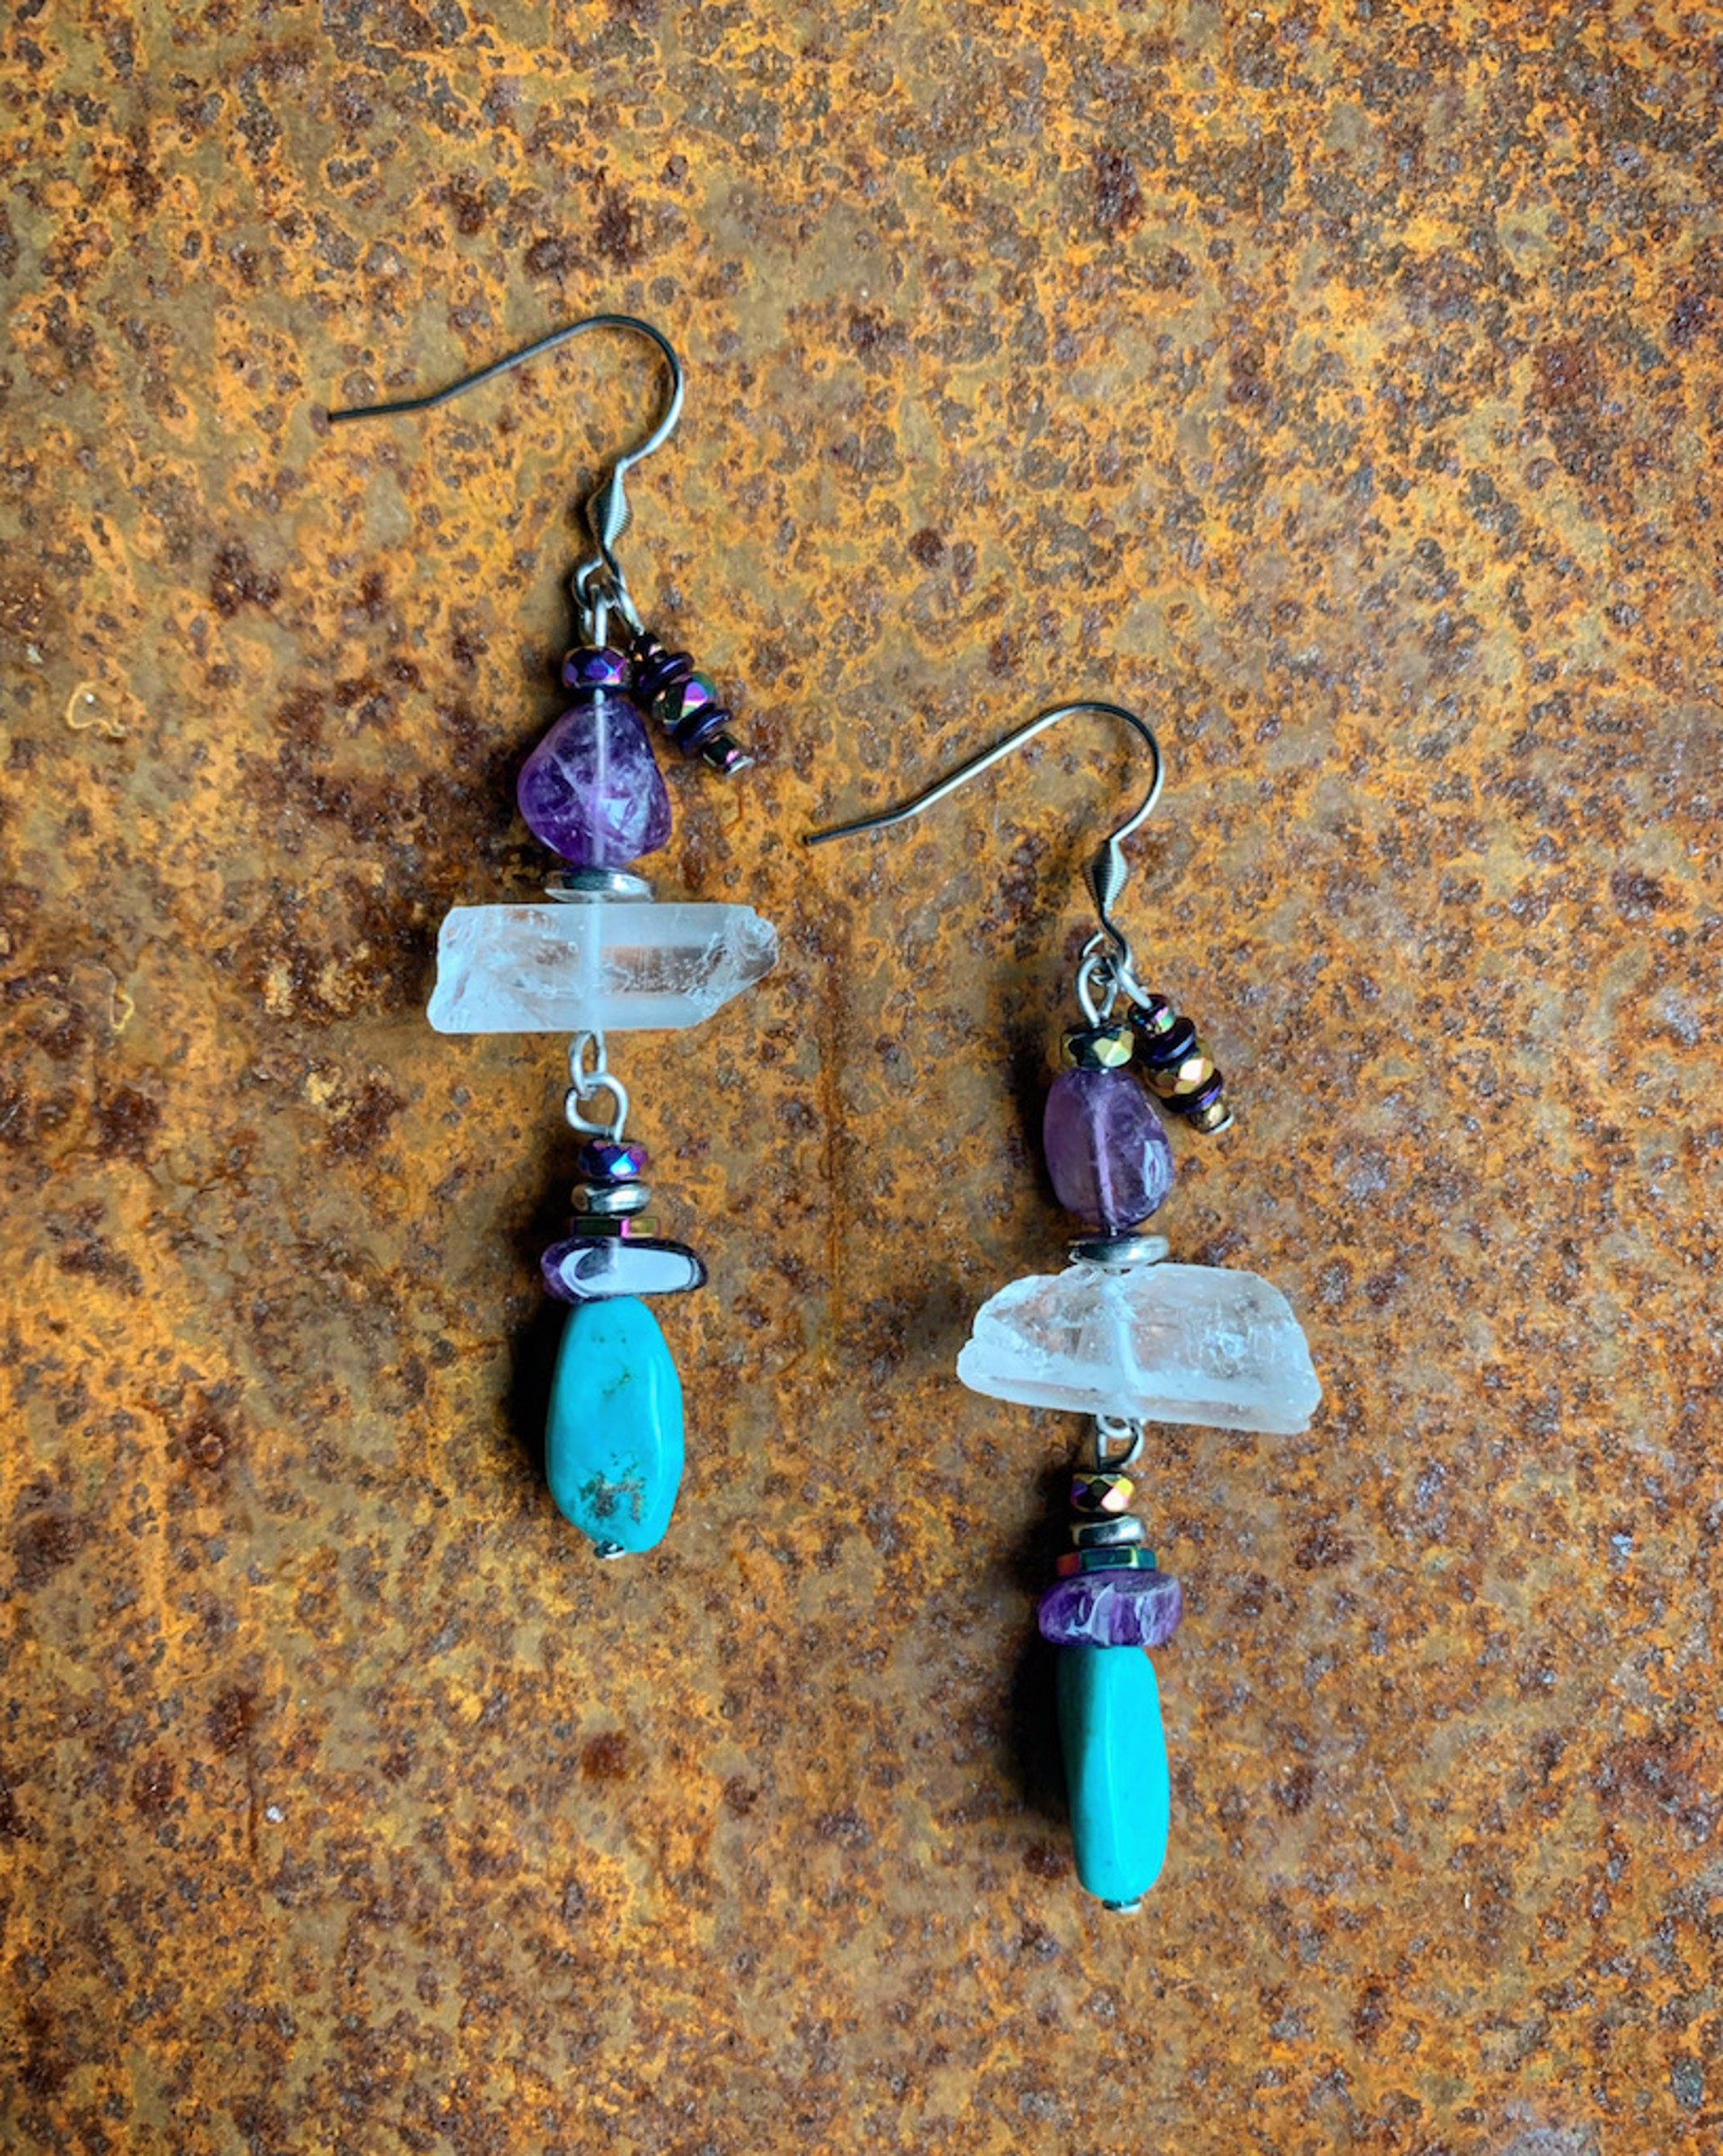 K706 Quartz, Amethyst and Turquoise Earrings by Kelly Ormsby